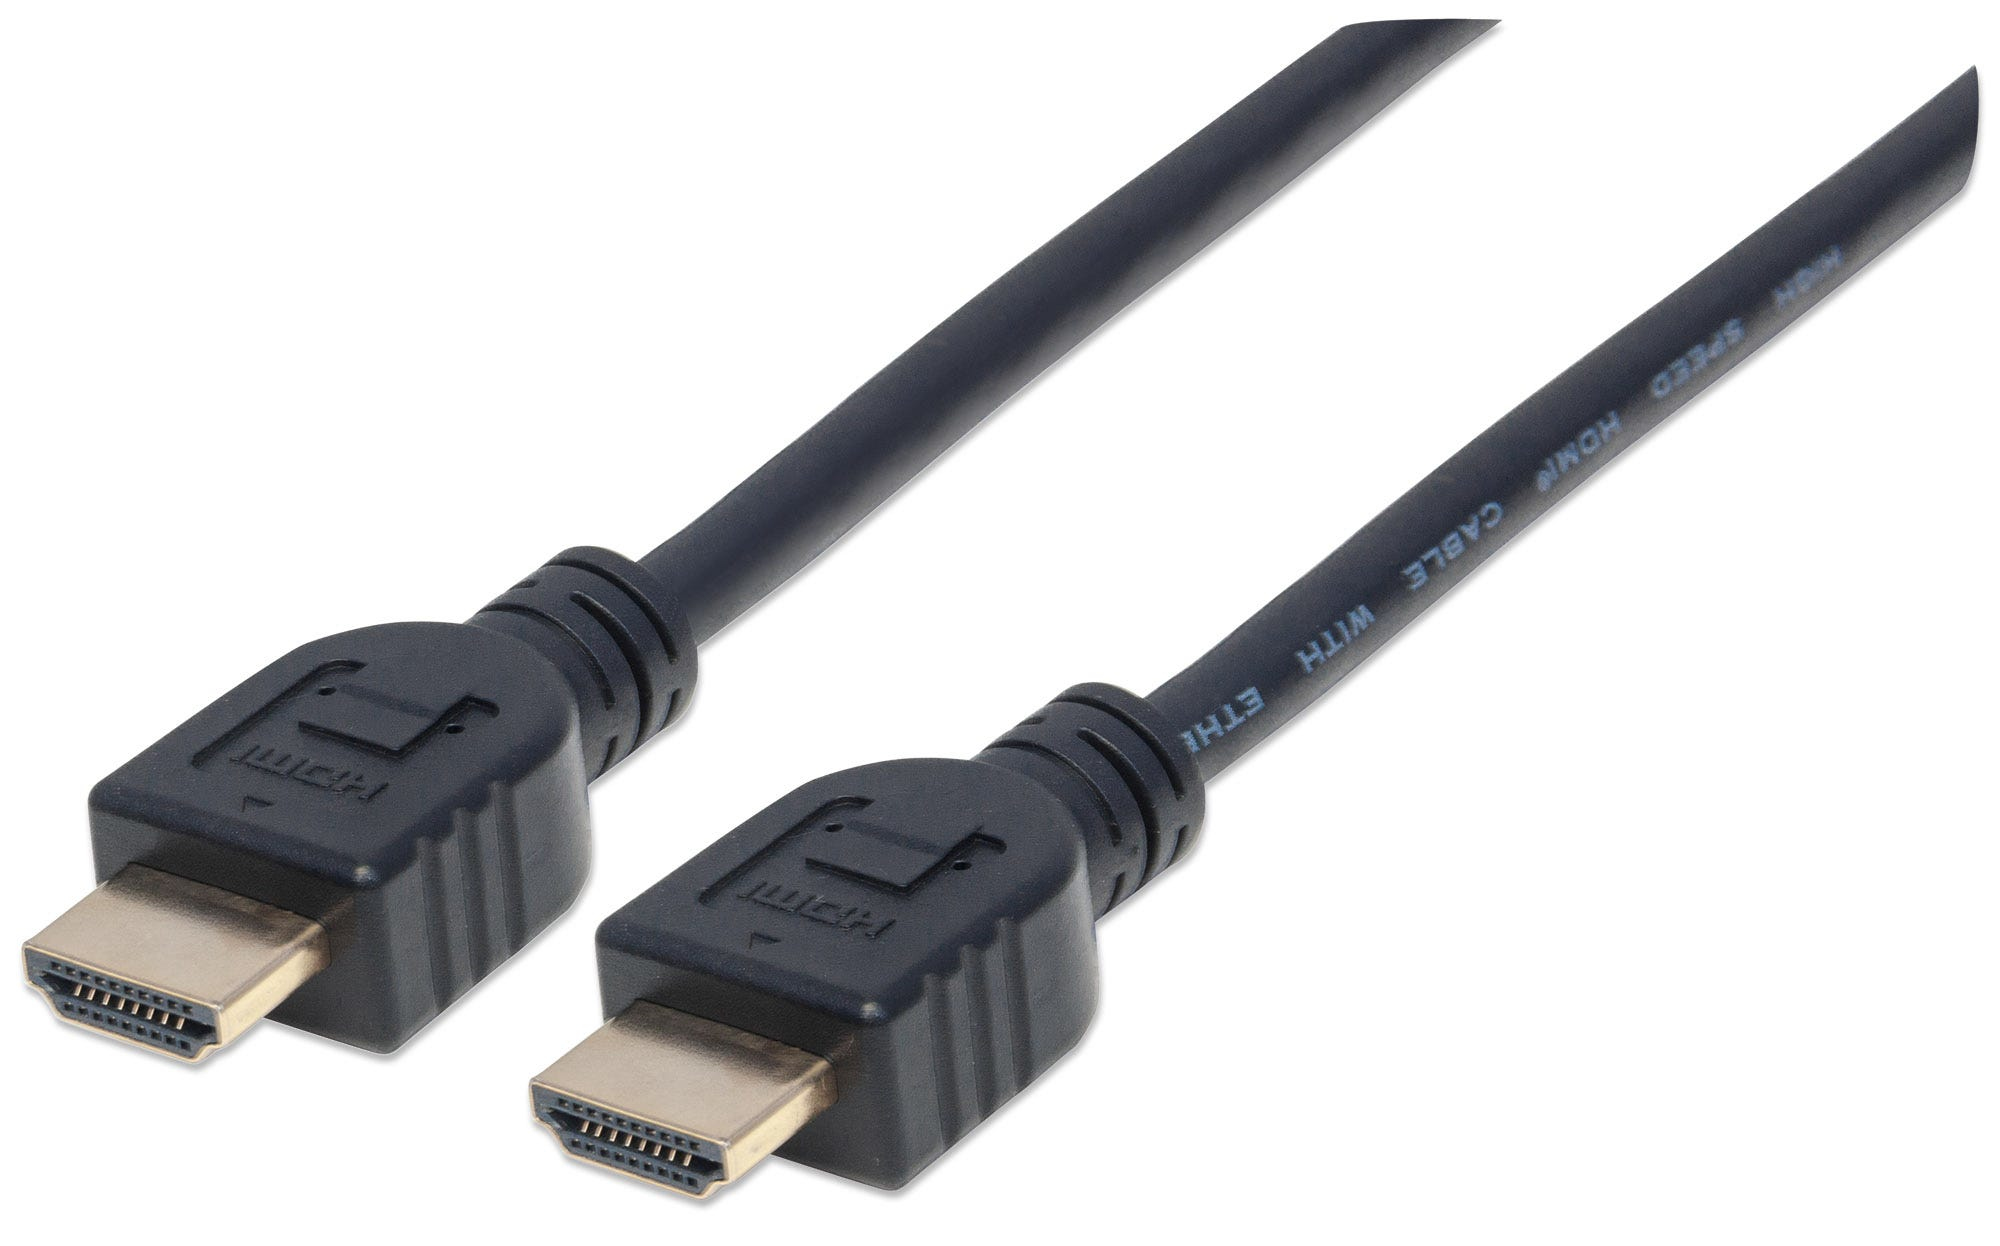 Manhattan HDMI Cable with Ethernet (CL3 rated, suitable for In-Wall use), 4K@60Hz (Premium High Speed)